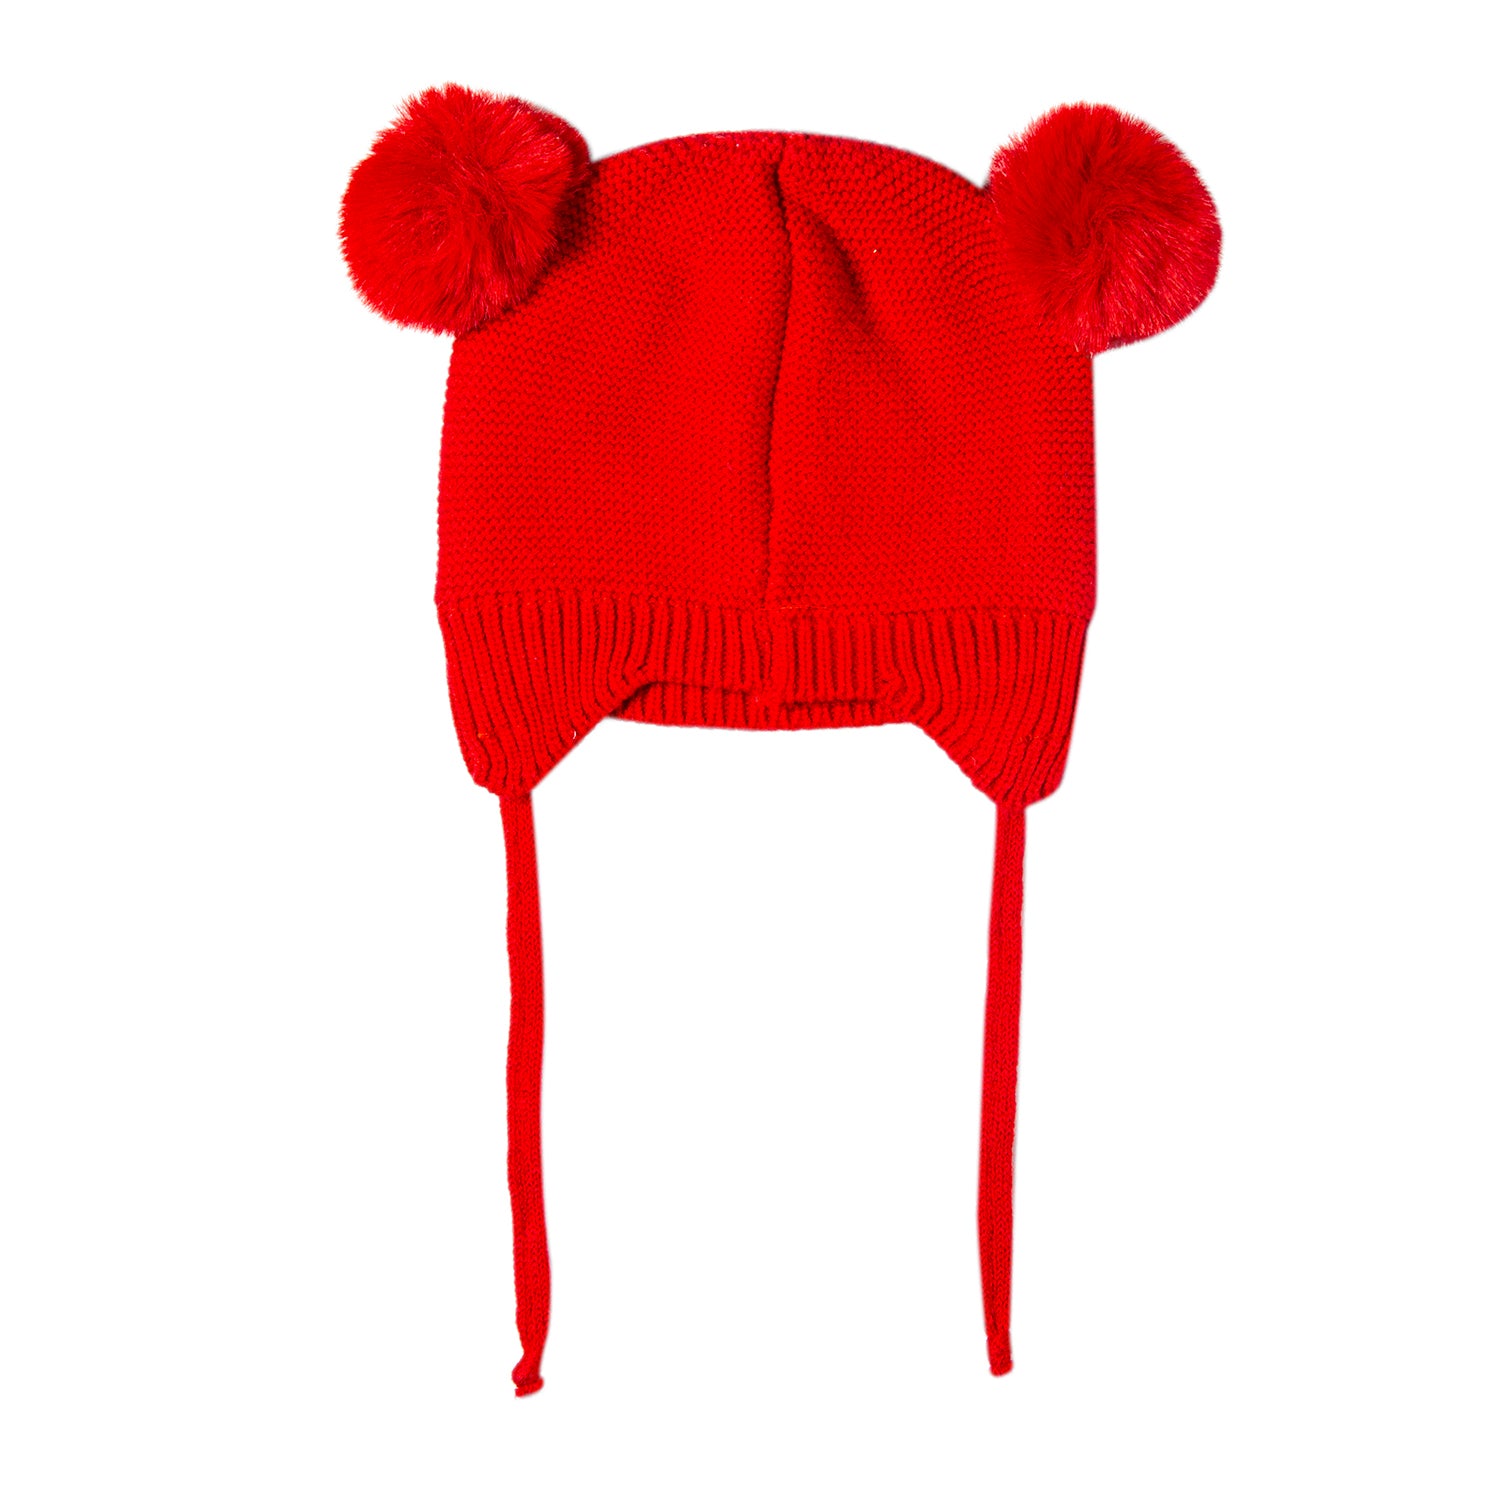 Knit Woollen Cap With Tie Knot For Ear Cover Sleeping Pom Pom Red - Baby Moo